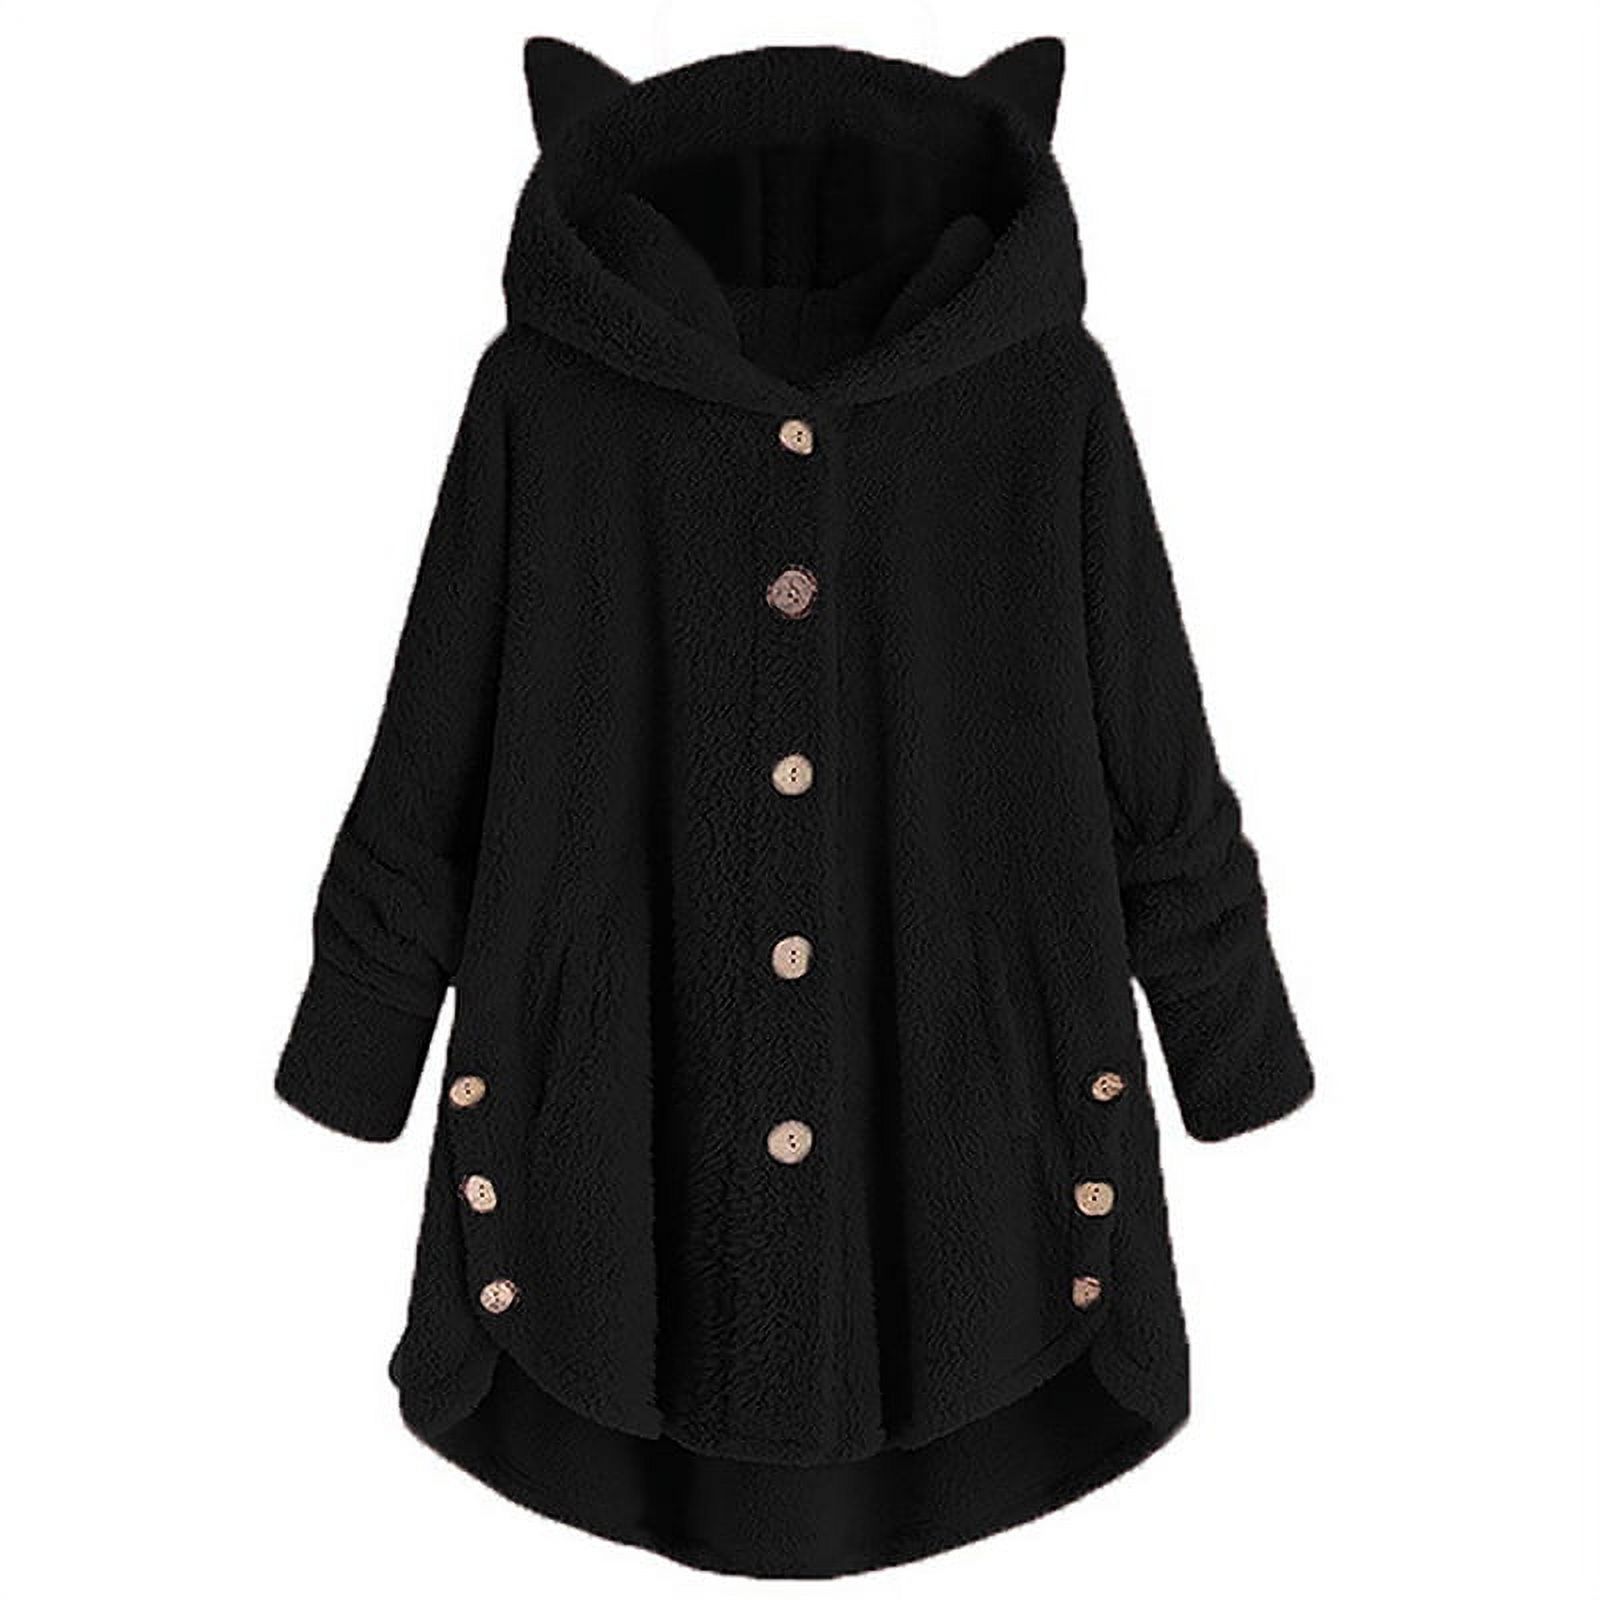 Female Faux Fur Coat Winter Warm Shearling Shaggy Jackets Button Tops for Women with Pockets - image 1 of 3